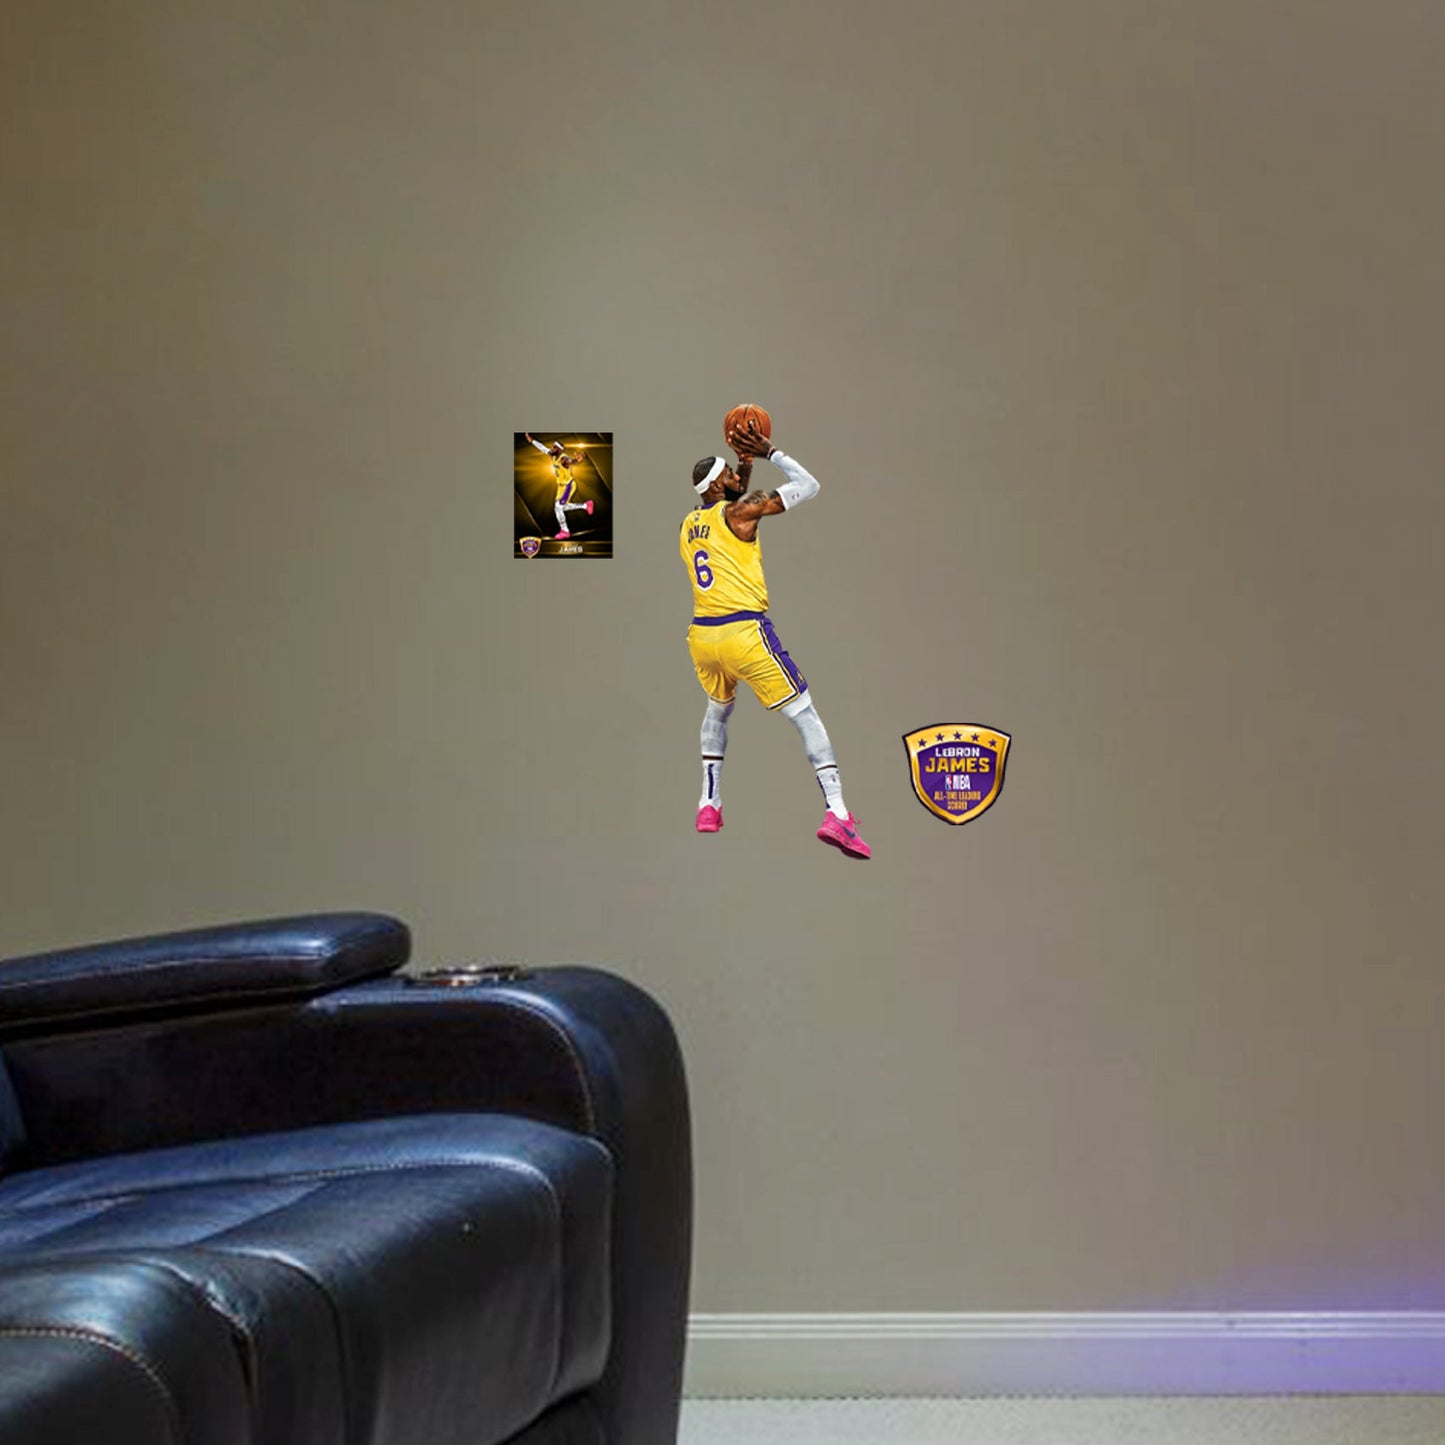 Los Angeles Lakers: LeBron James All-Time Scoring Leader Shot - Officially Licensed NBA Removable Adhesive Decal